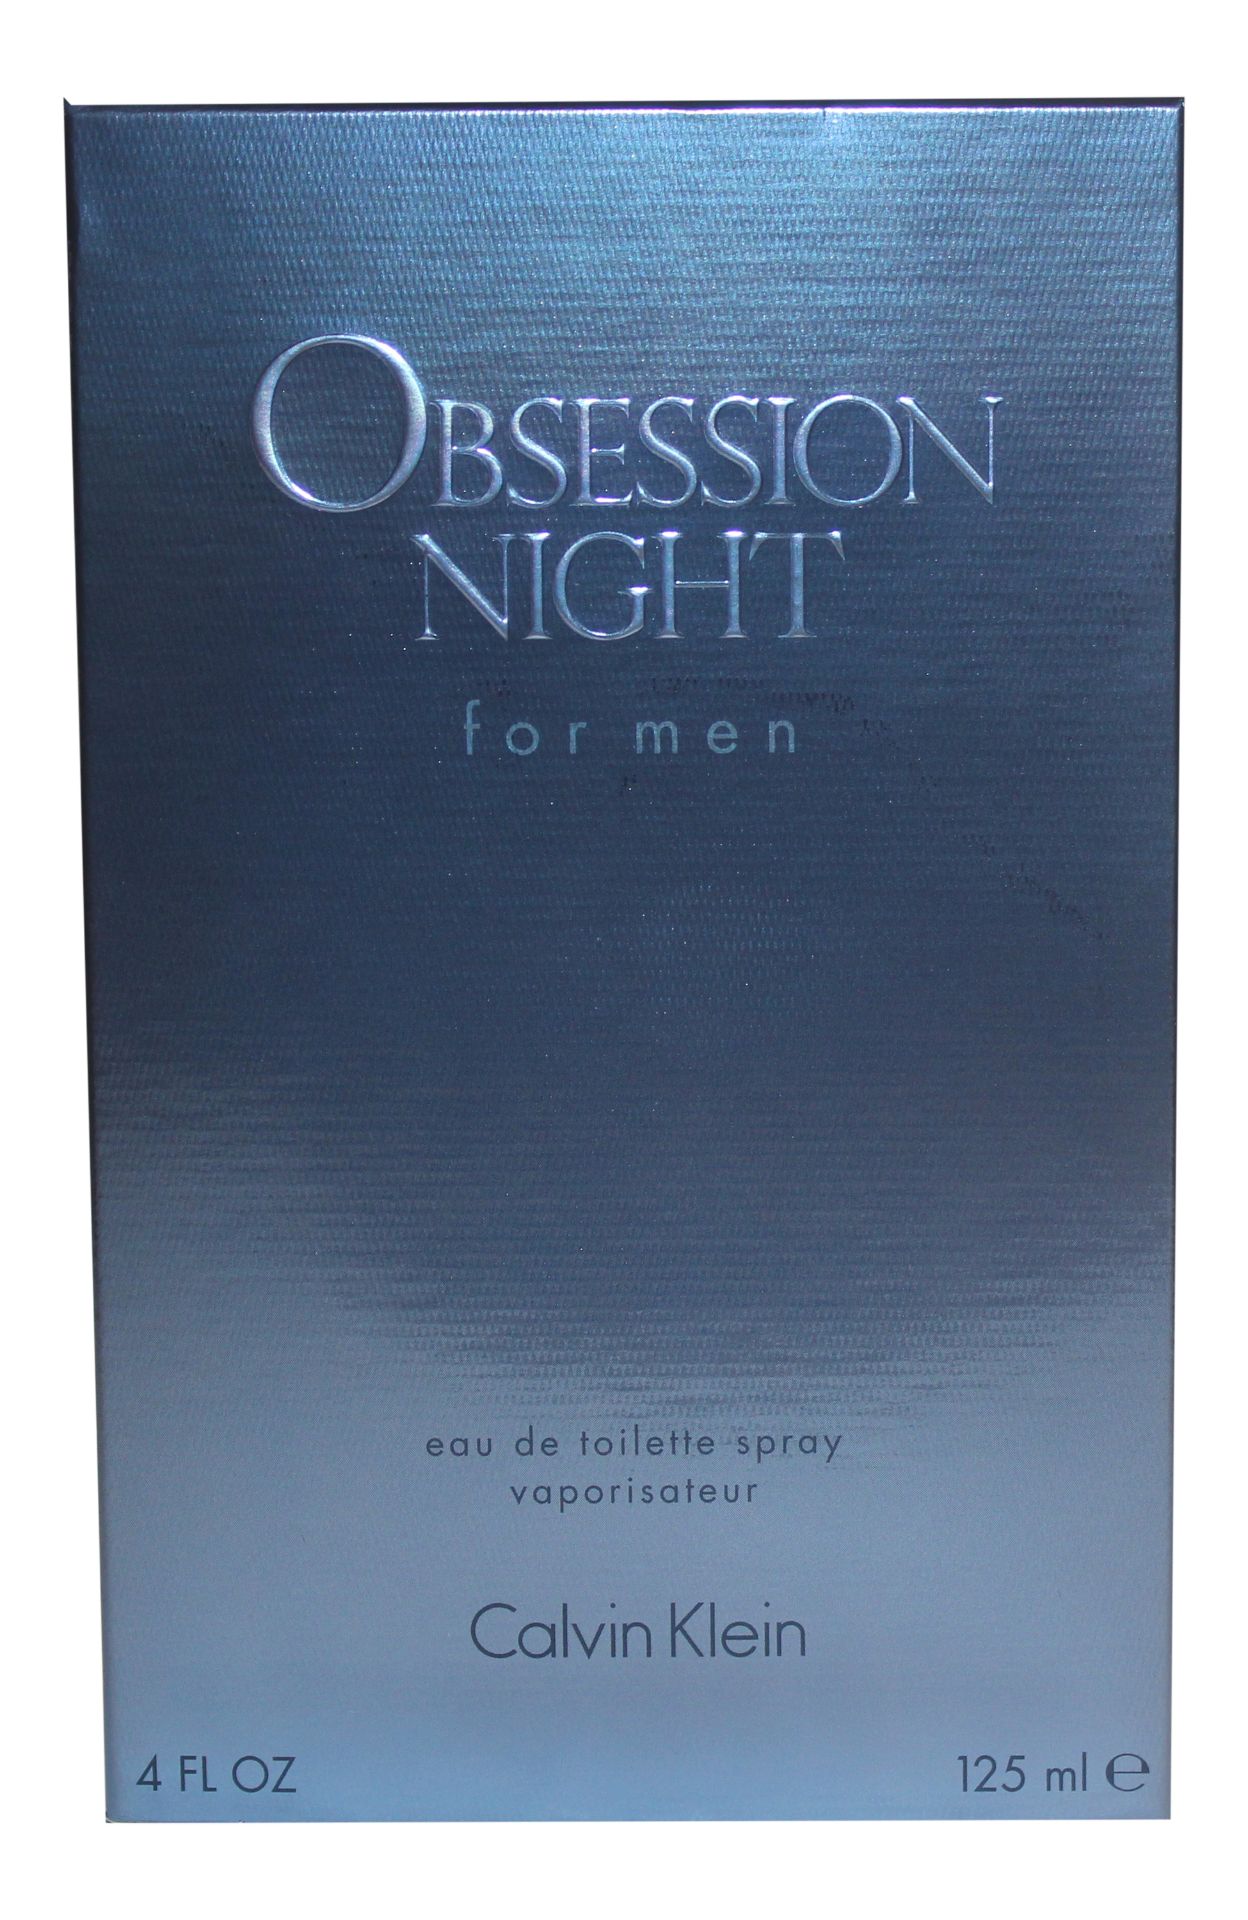 Obsession Night for Men 125ml EDT Spray x 1 Unit - Image 3 of 3